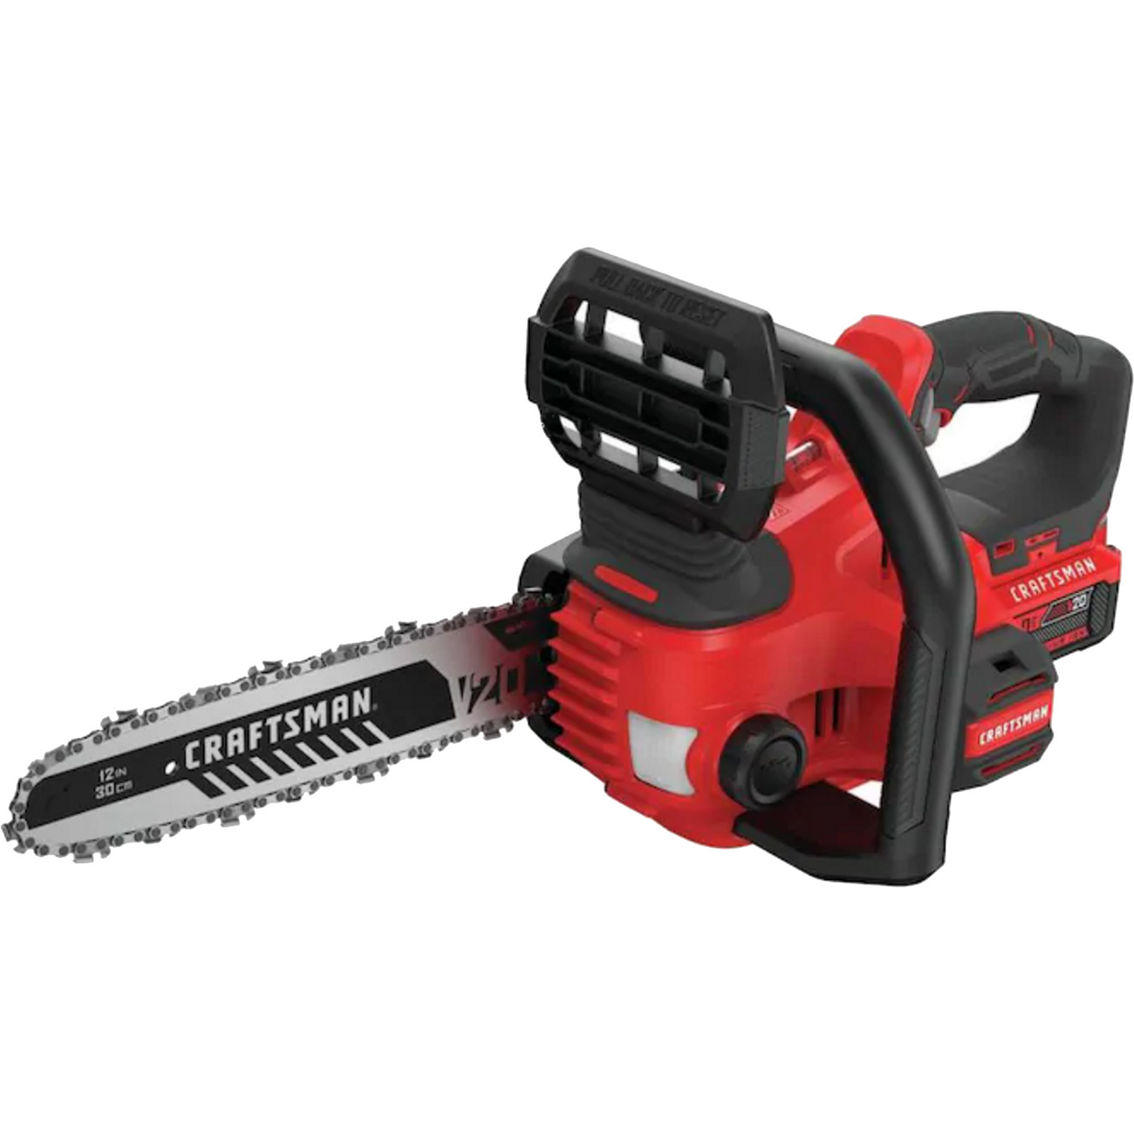 Craftsman V20 Cordless 12 in. Compact Chainsaw - Image 4 of 5